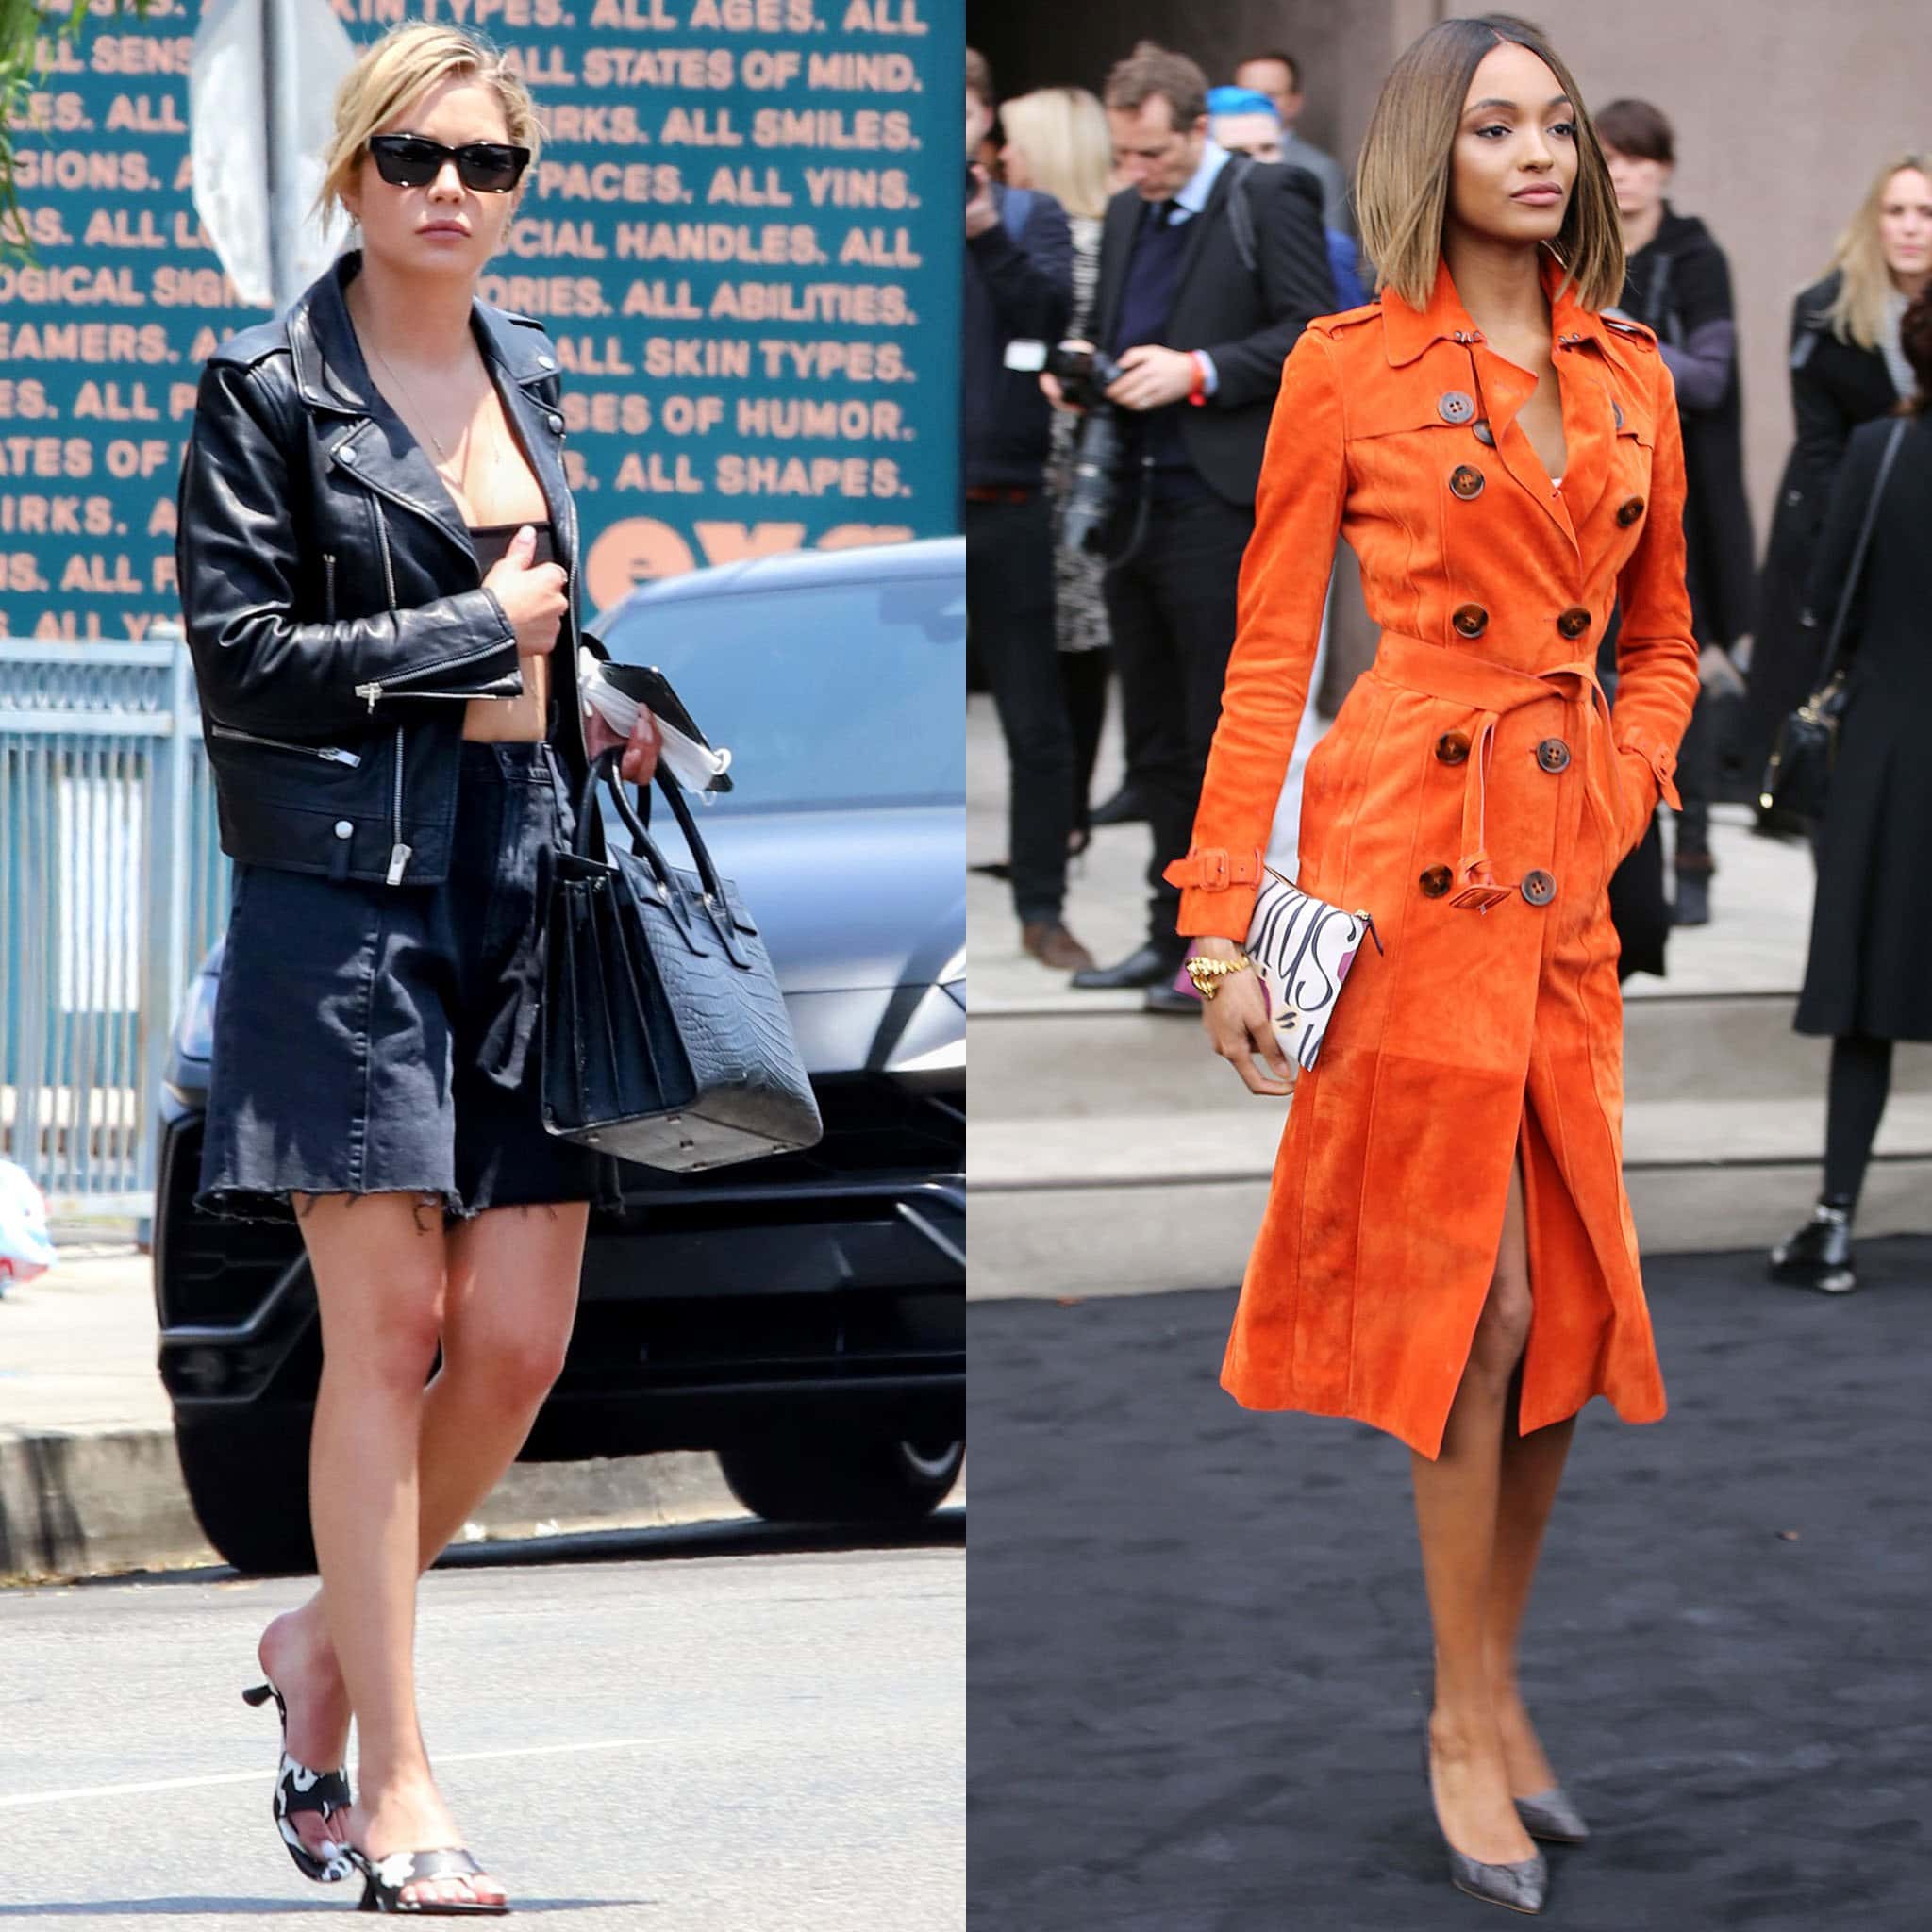 Ashley Benson is summery in crop top, denim shorts, and cow-print mules, while Jourdan Dunn looks cozy in her orange winter coat and reptile pumps